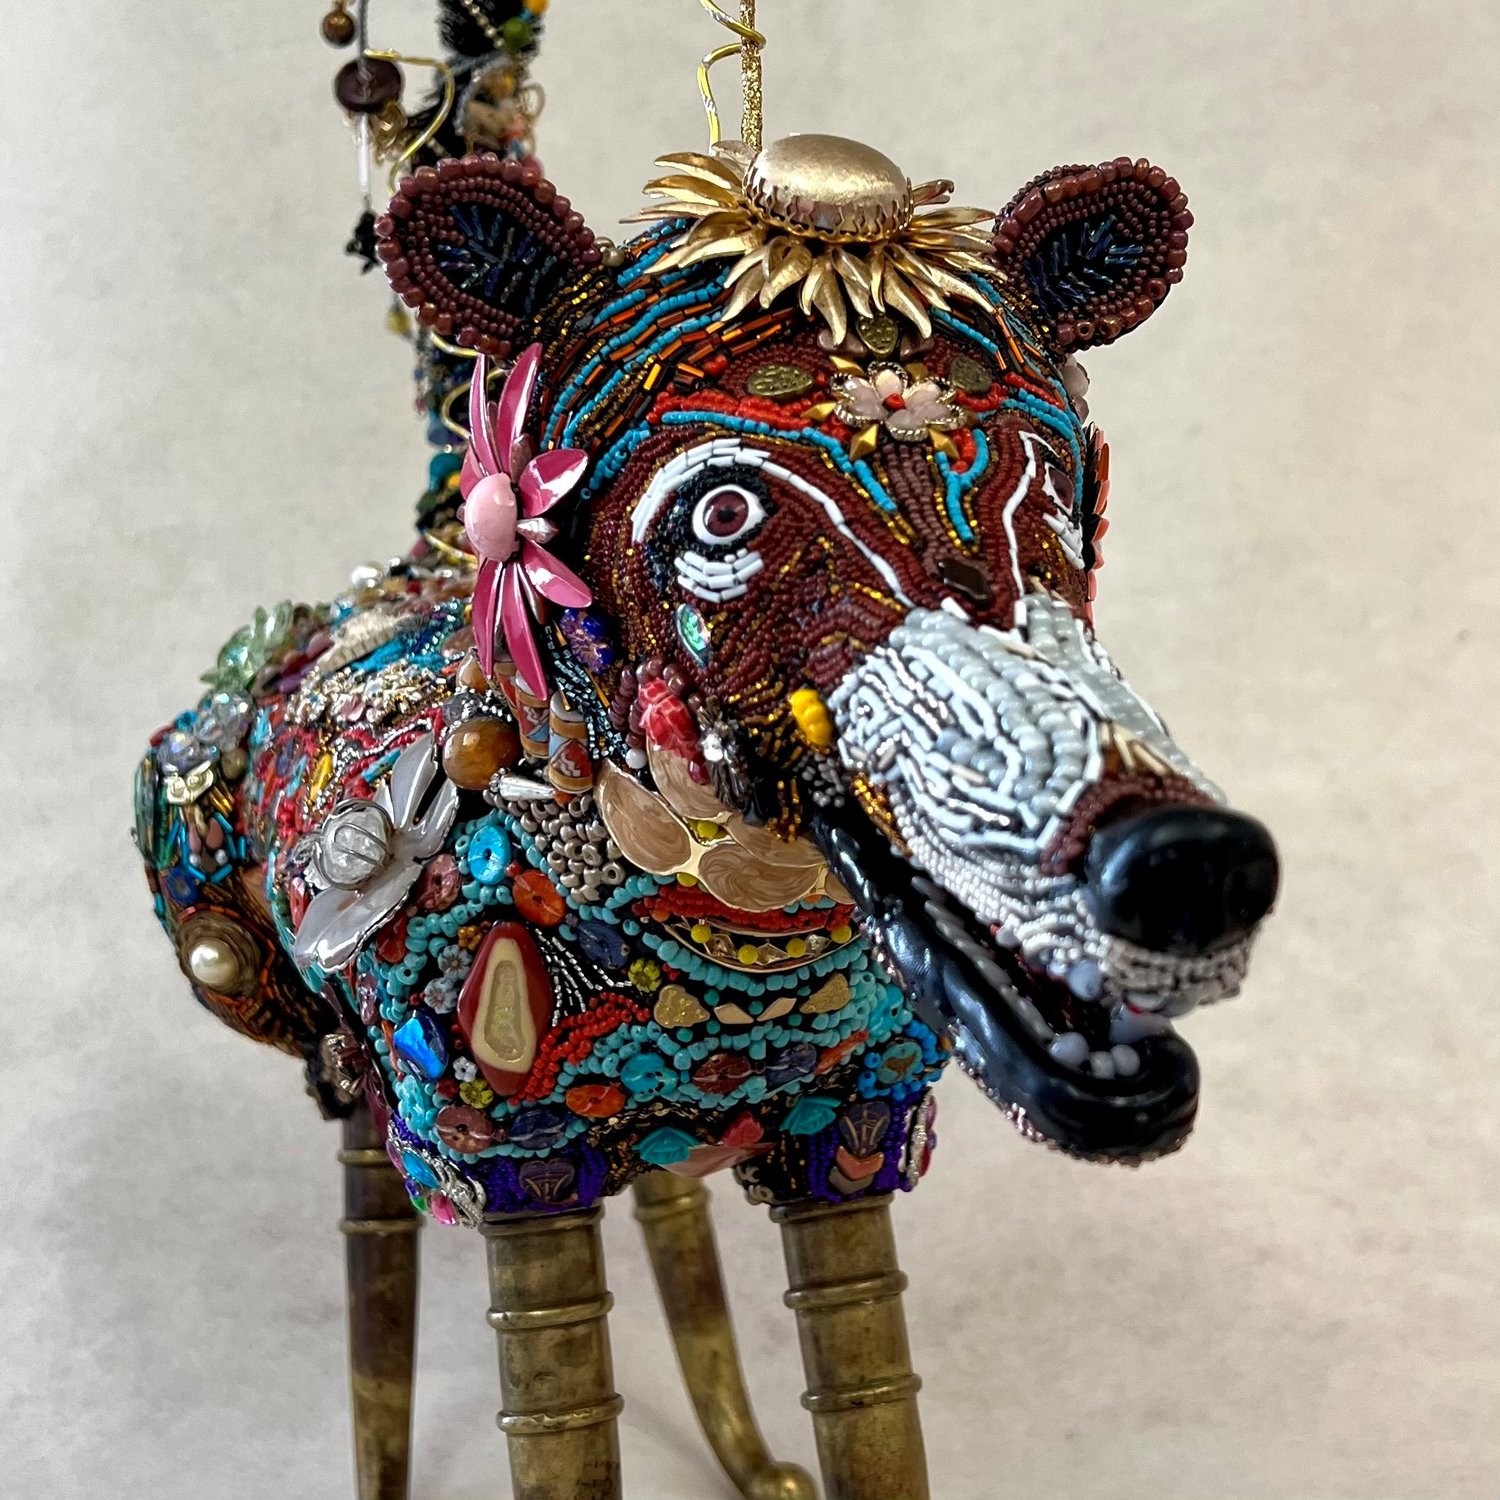 Grant County Art Guild Gallery holds a critters show, this is Beaded Coatimundi by Marsha Banas.